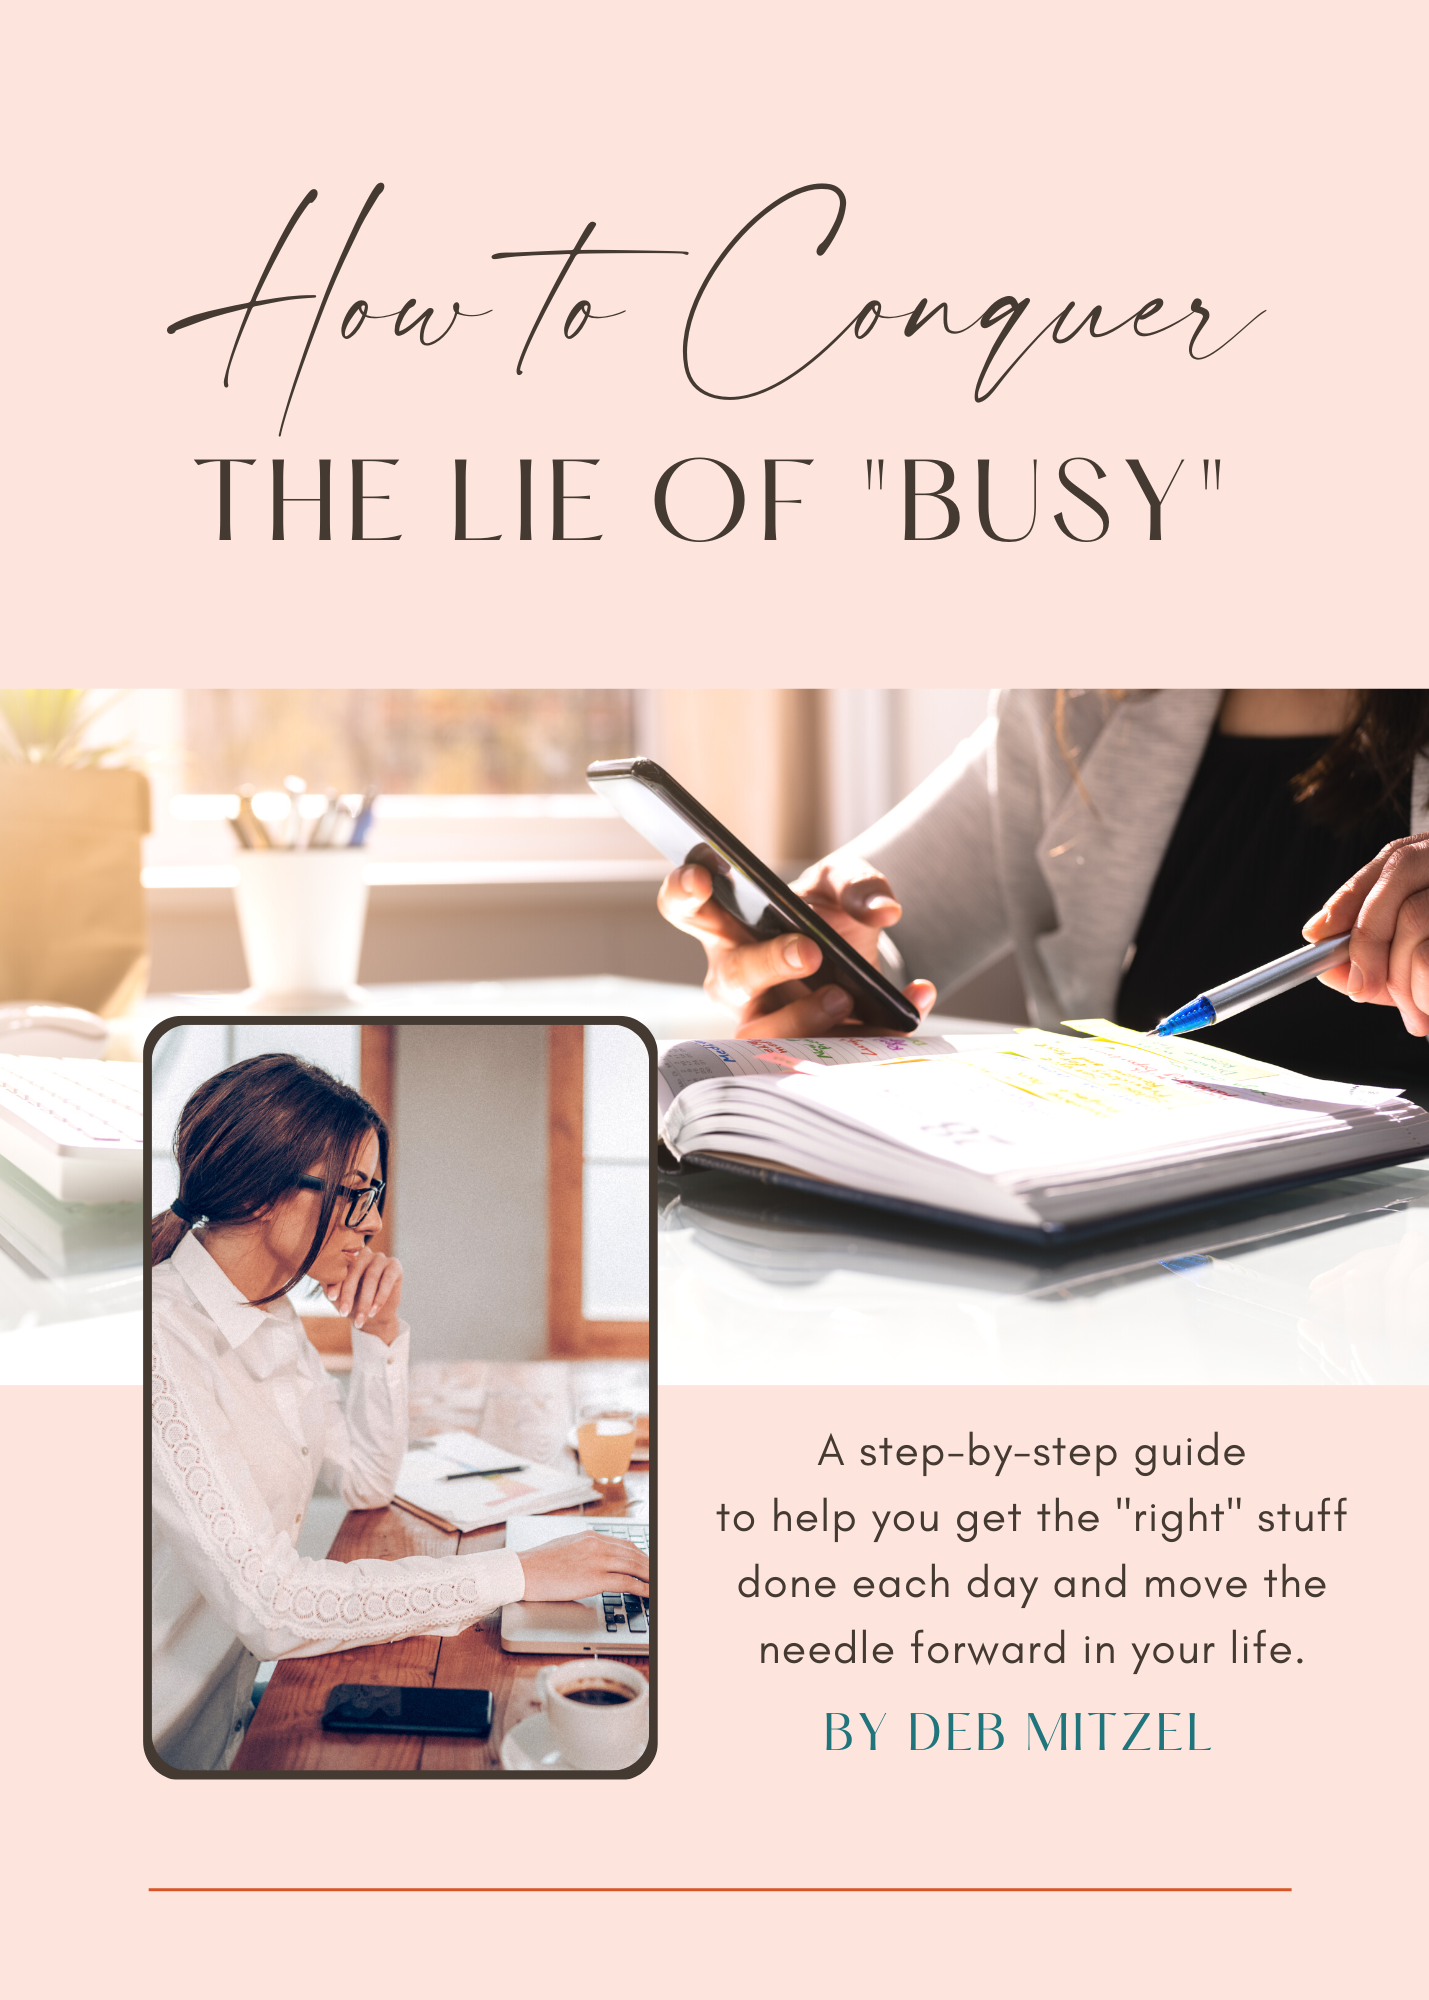 Image is a cover of the How to Conquer the Lie of "Busy" guide by Deb Mitzel Creative.